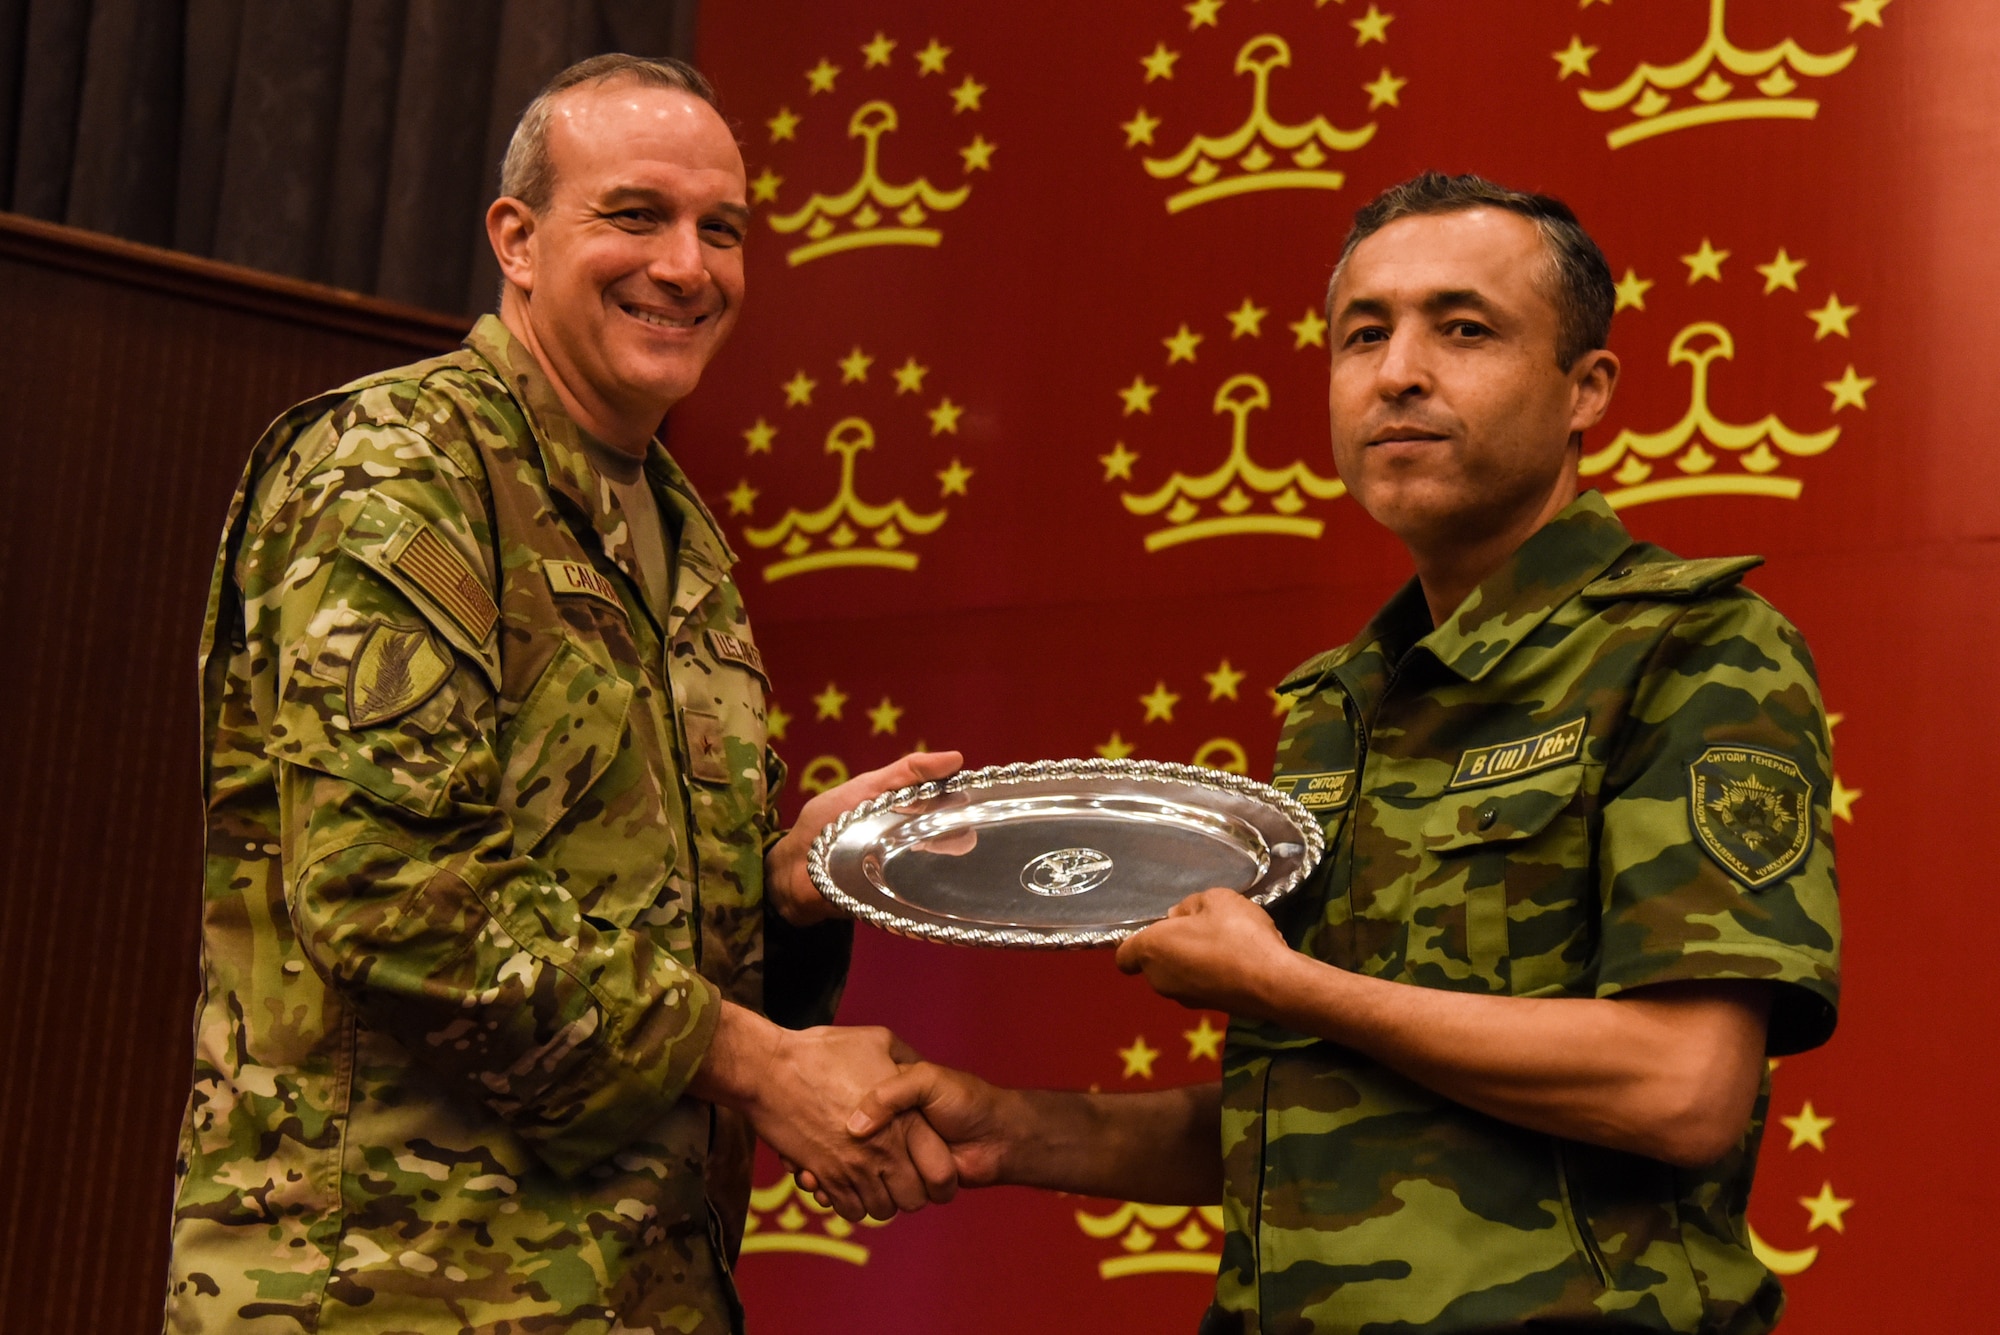 Brig. Gen. Maurizio D. Calabrese, deputy commanding general for intelligence at U.S. Central Command’s Over-the-Horizon Counterterrorism Headquarters, exchanges a gift at the close of the Regional Cooperation 22 exercise in Dushanbe, Tajikistan, Aug. 19, 2022. RC 22 is an annual, multinational U.S. Central Command-sponsored exercise conducted by U.S. forces with Central and South Asia nations.